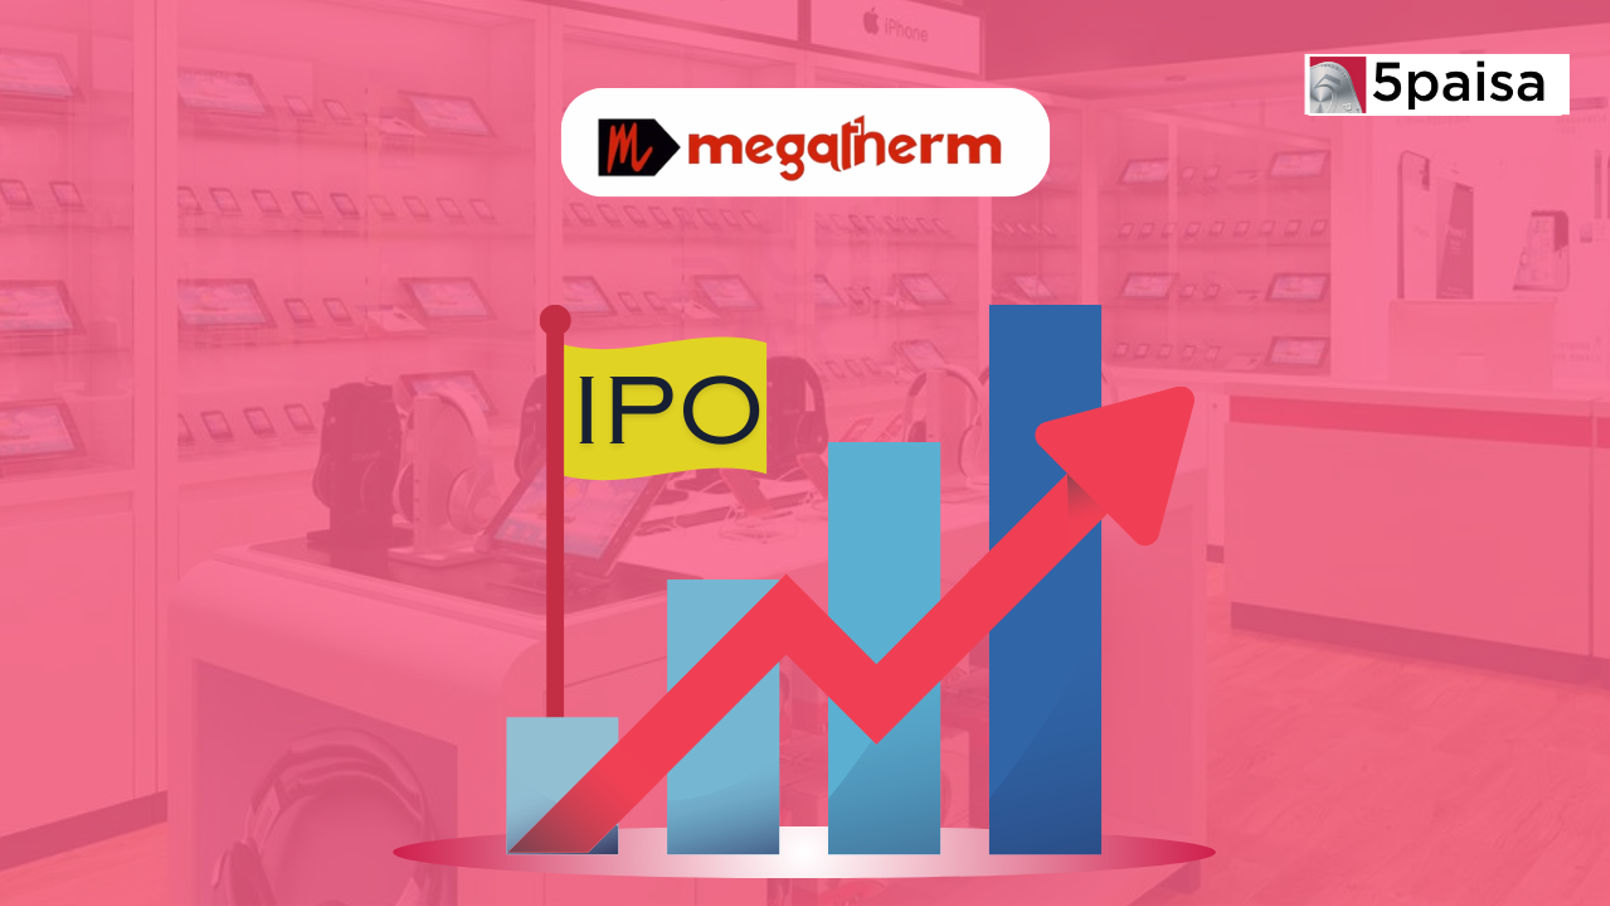 Megatherm Induction IPO Financial Analysis